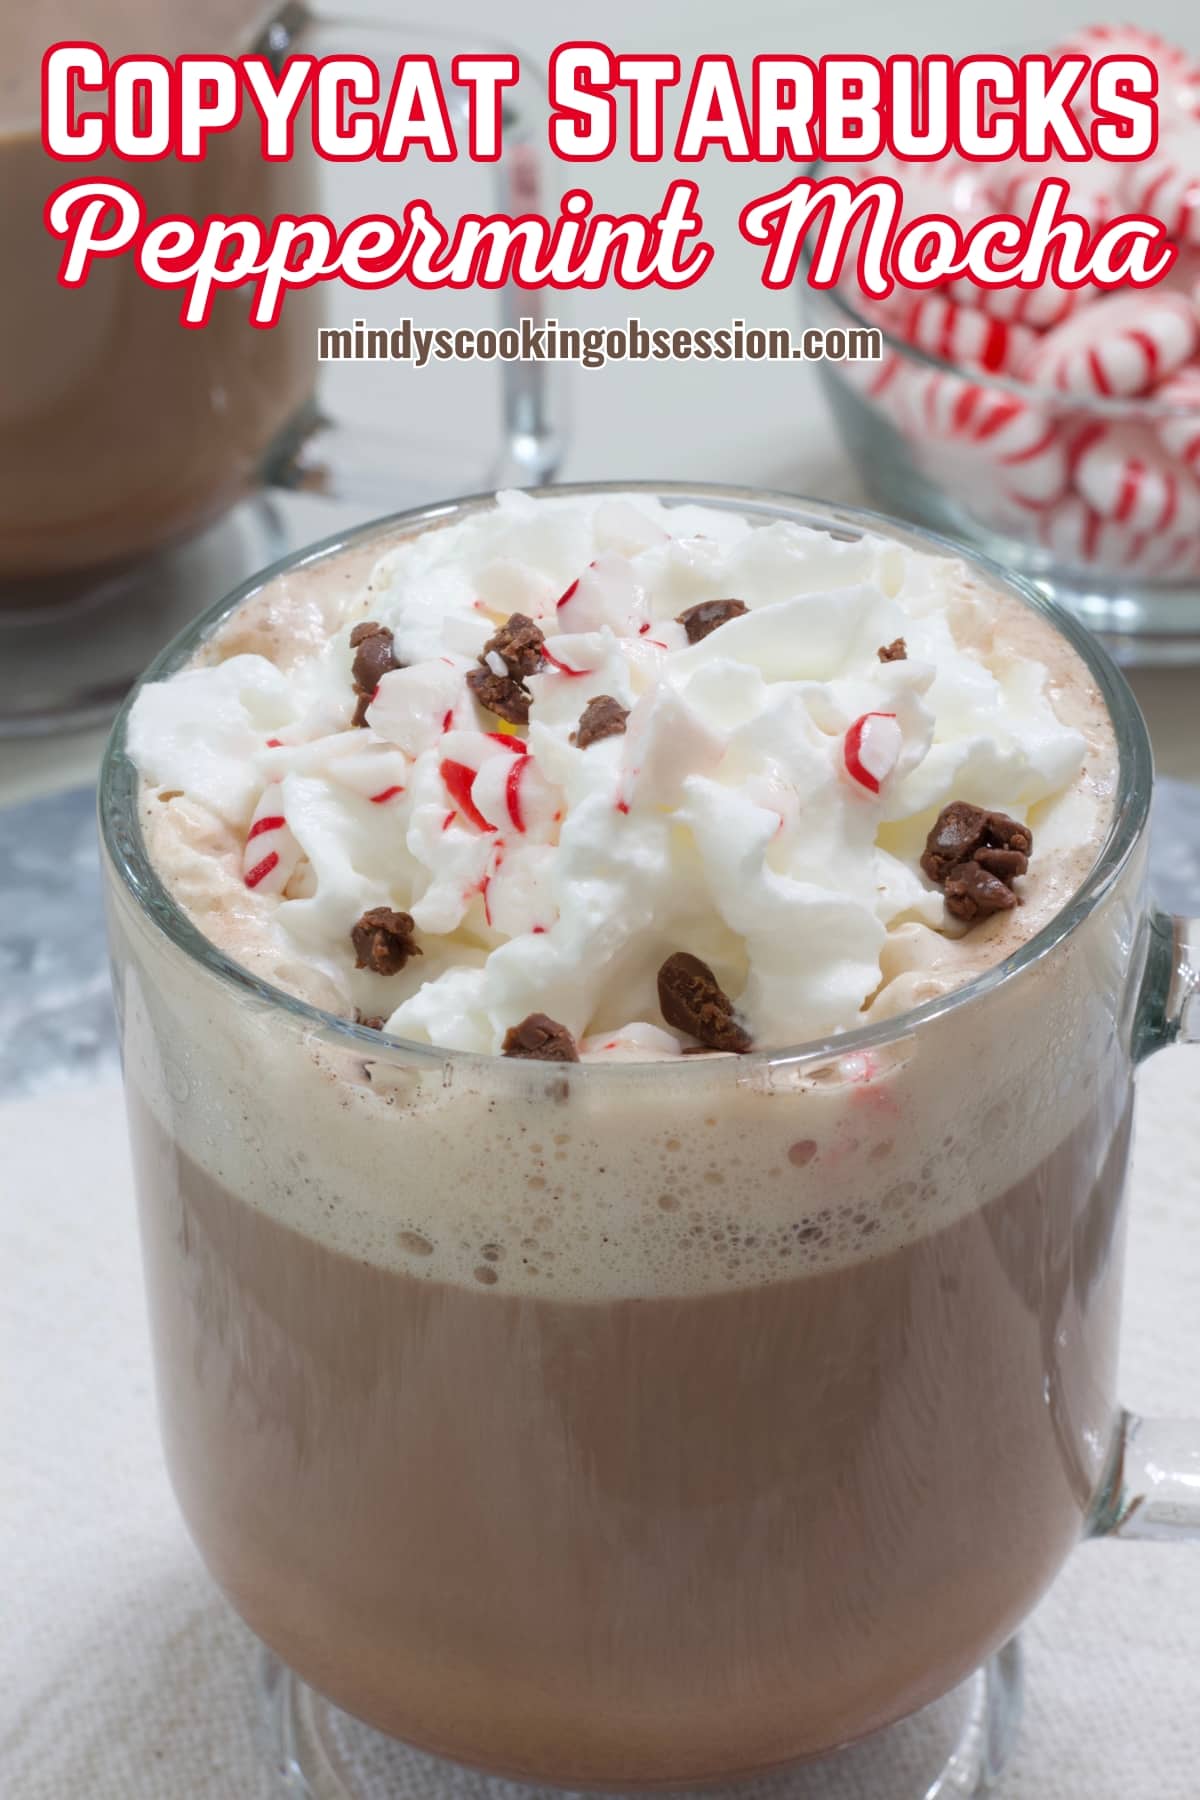 Easy Homemade Starbucks Peppermint Mocha Coffee Recipe! Coffee is mixed with cocoa, sugar and peppermint to make this coffeeshop copycat.  via @mindyscookingobsession